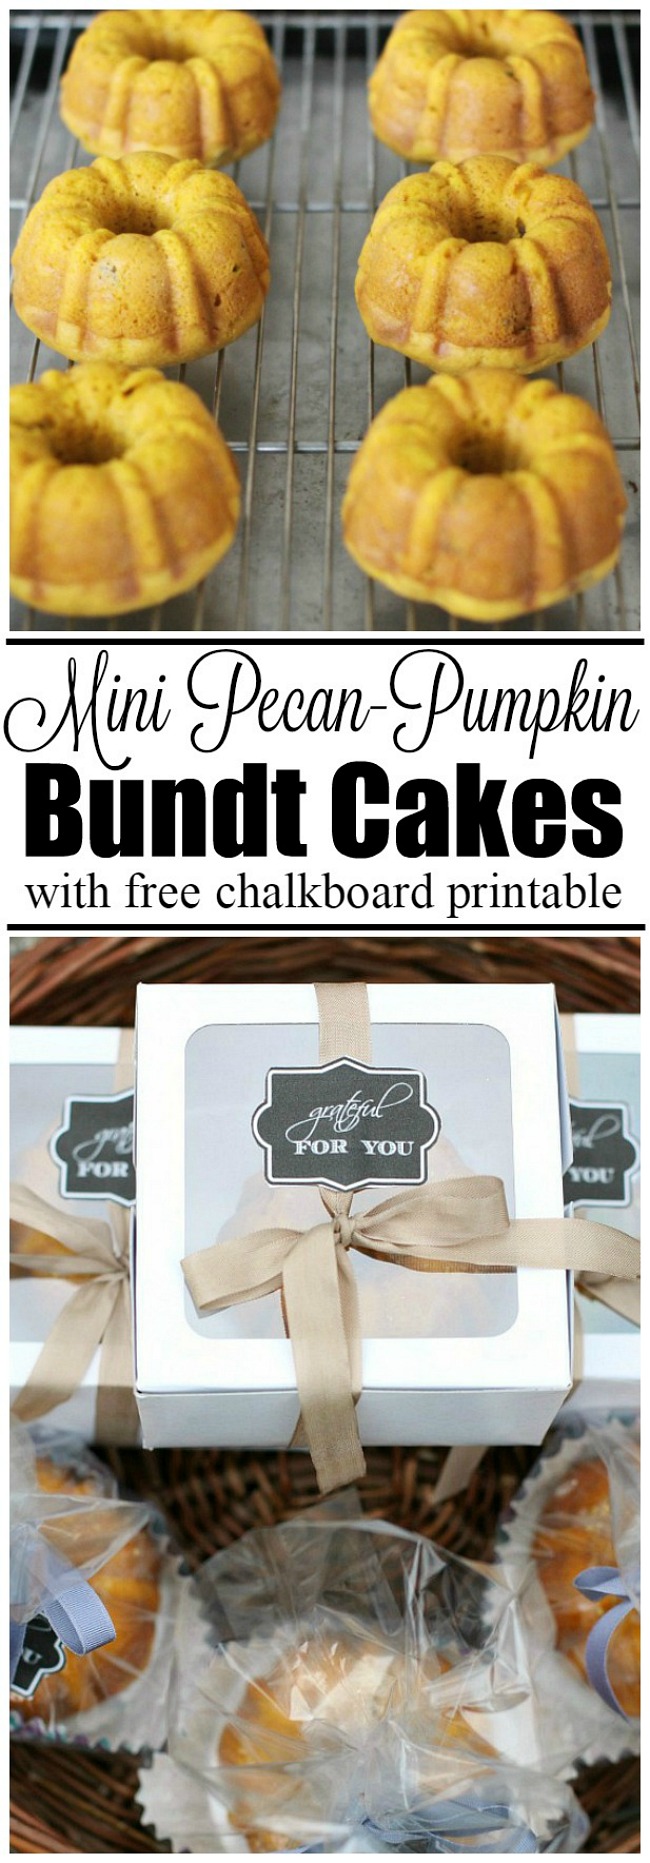 These mini pecan pumpkin bundt cakes taste so good and make the perfect little Thanksgiving gift idea! Free chalkboard printable included!